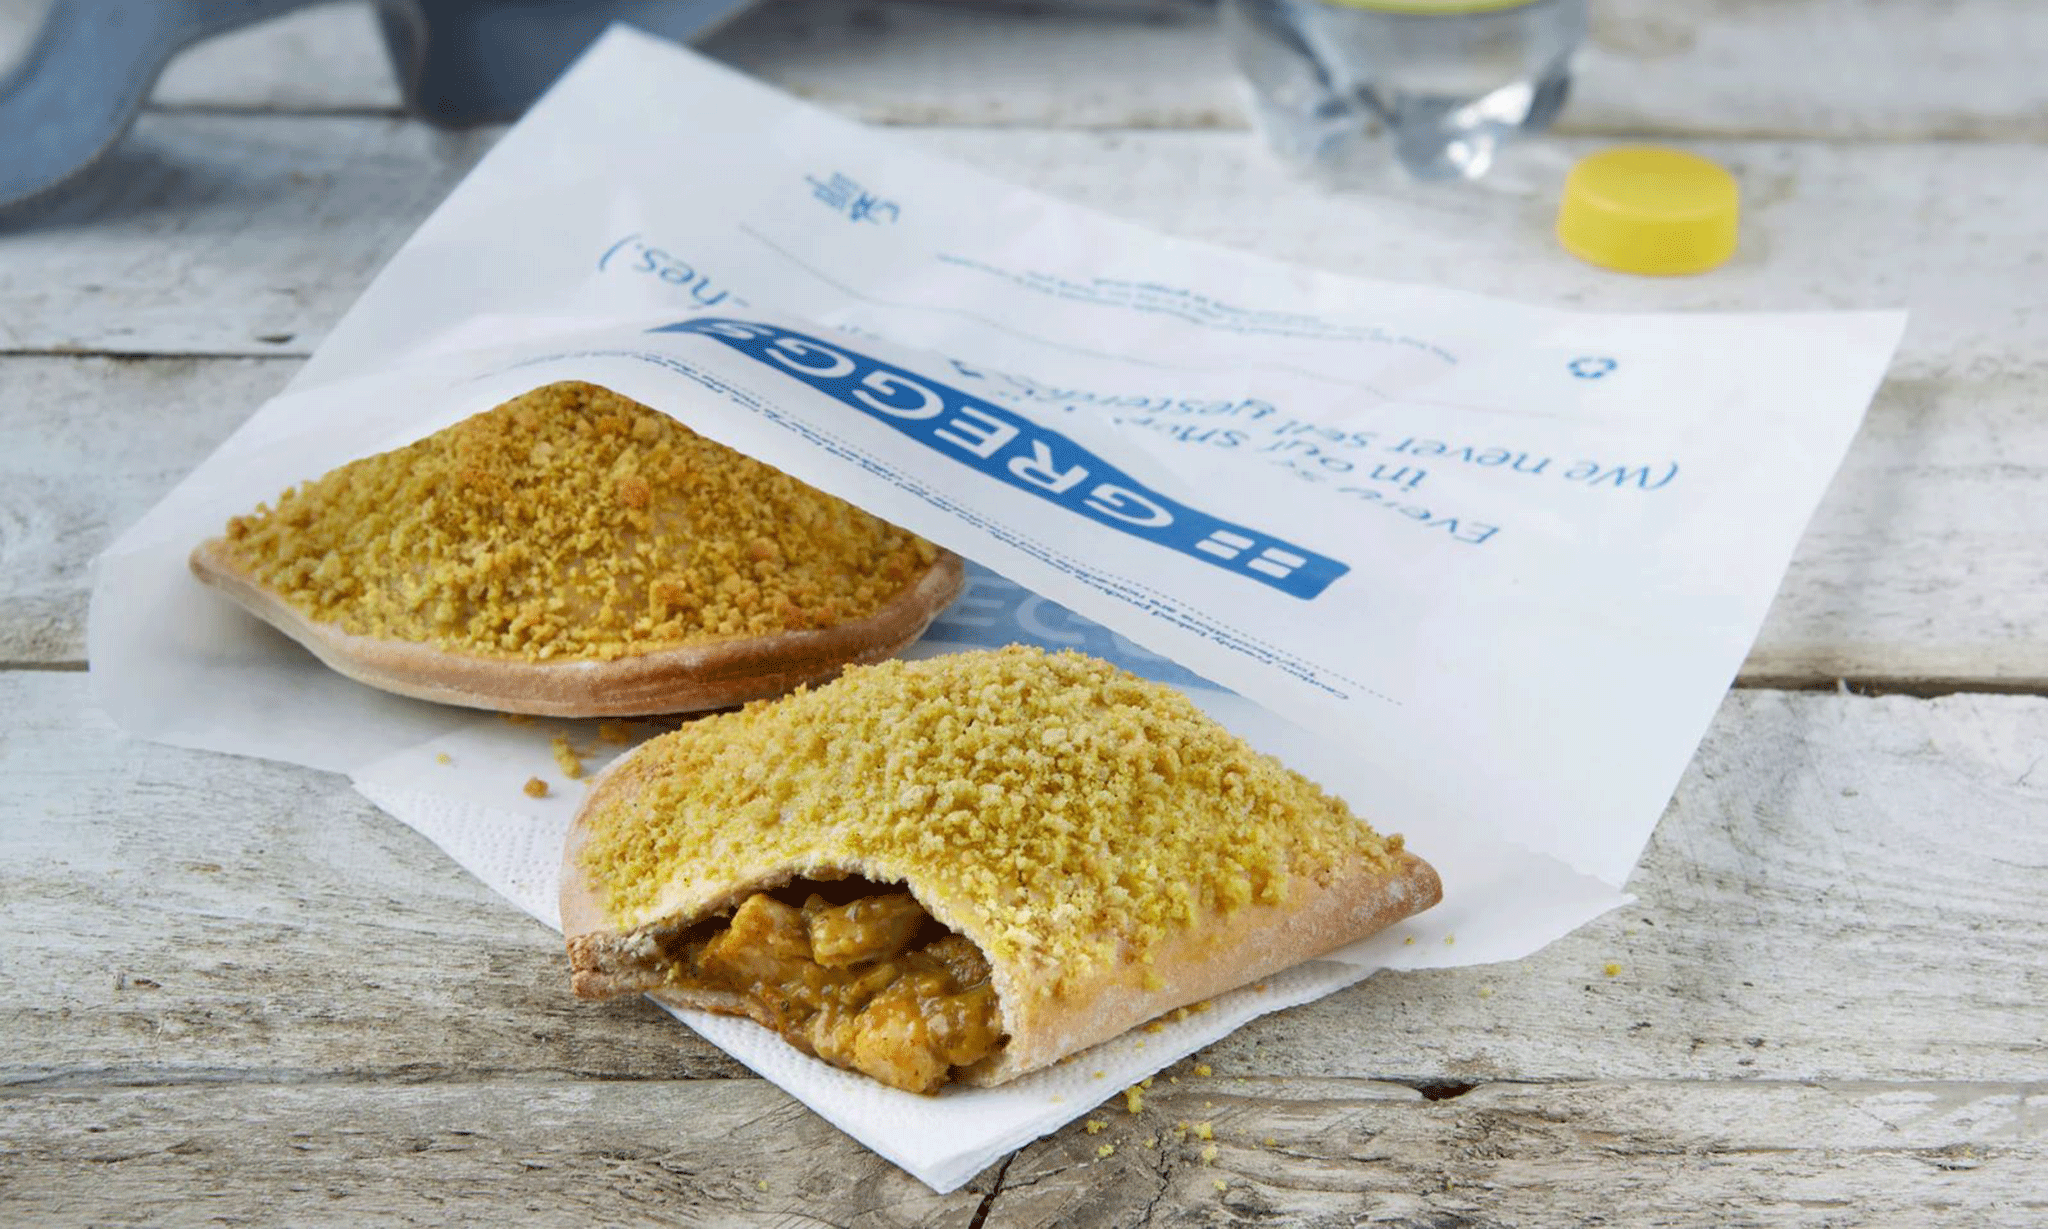 Greggs new 'healthy' sourdough pasties are part of a move to diversify away from fatty foods